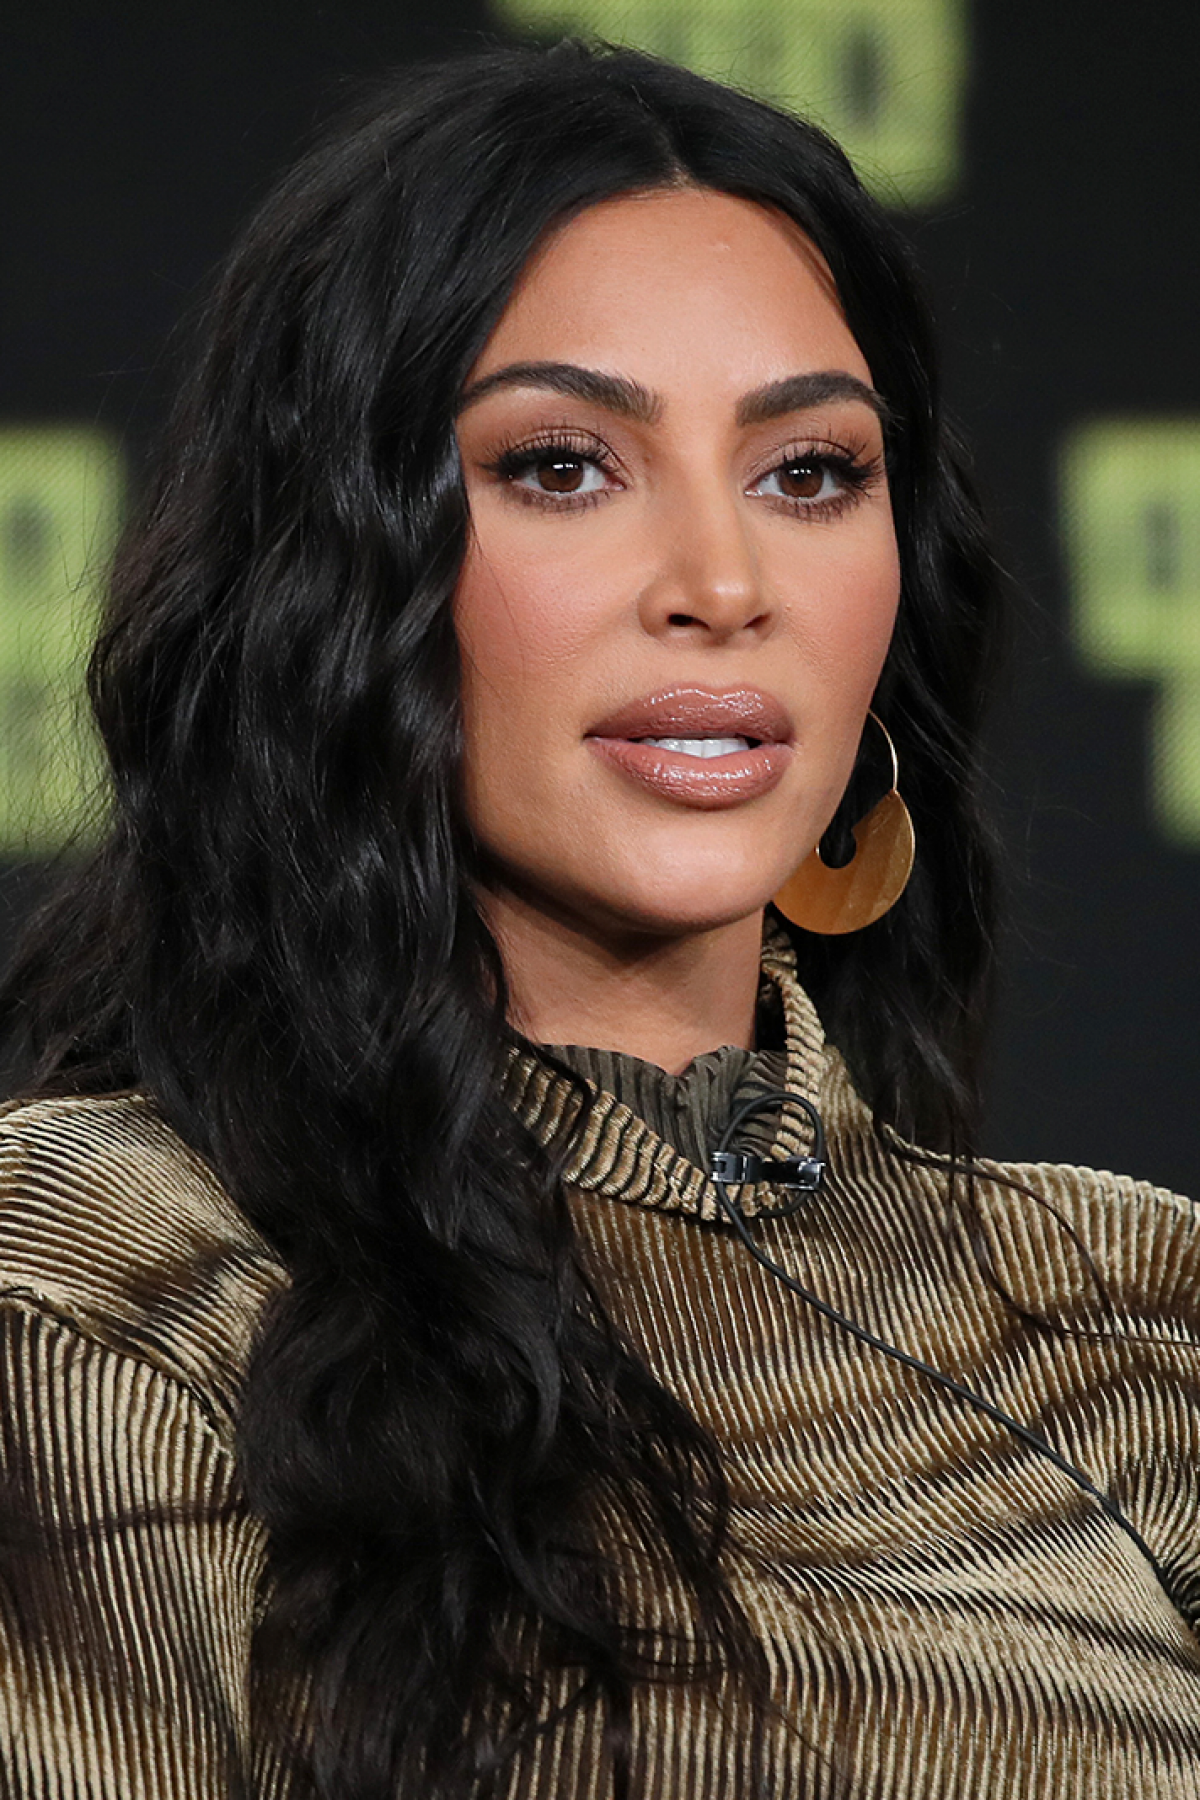 Kim Kardashian West of 'The Justice Project' speaks onstage during the 2020 Winter TCA Tour Day 12 at The Langham Huntington, Pasadena on January 18, 2020 in Pasadena, California. Photo by David Livingston/Getty Images